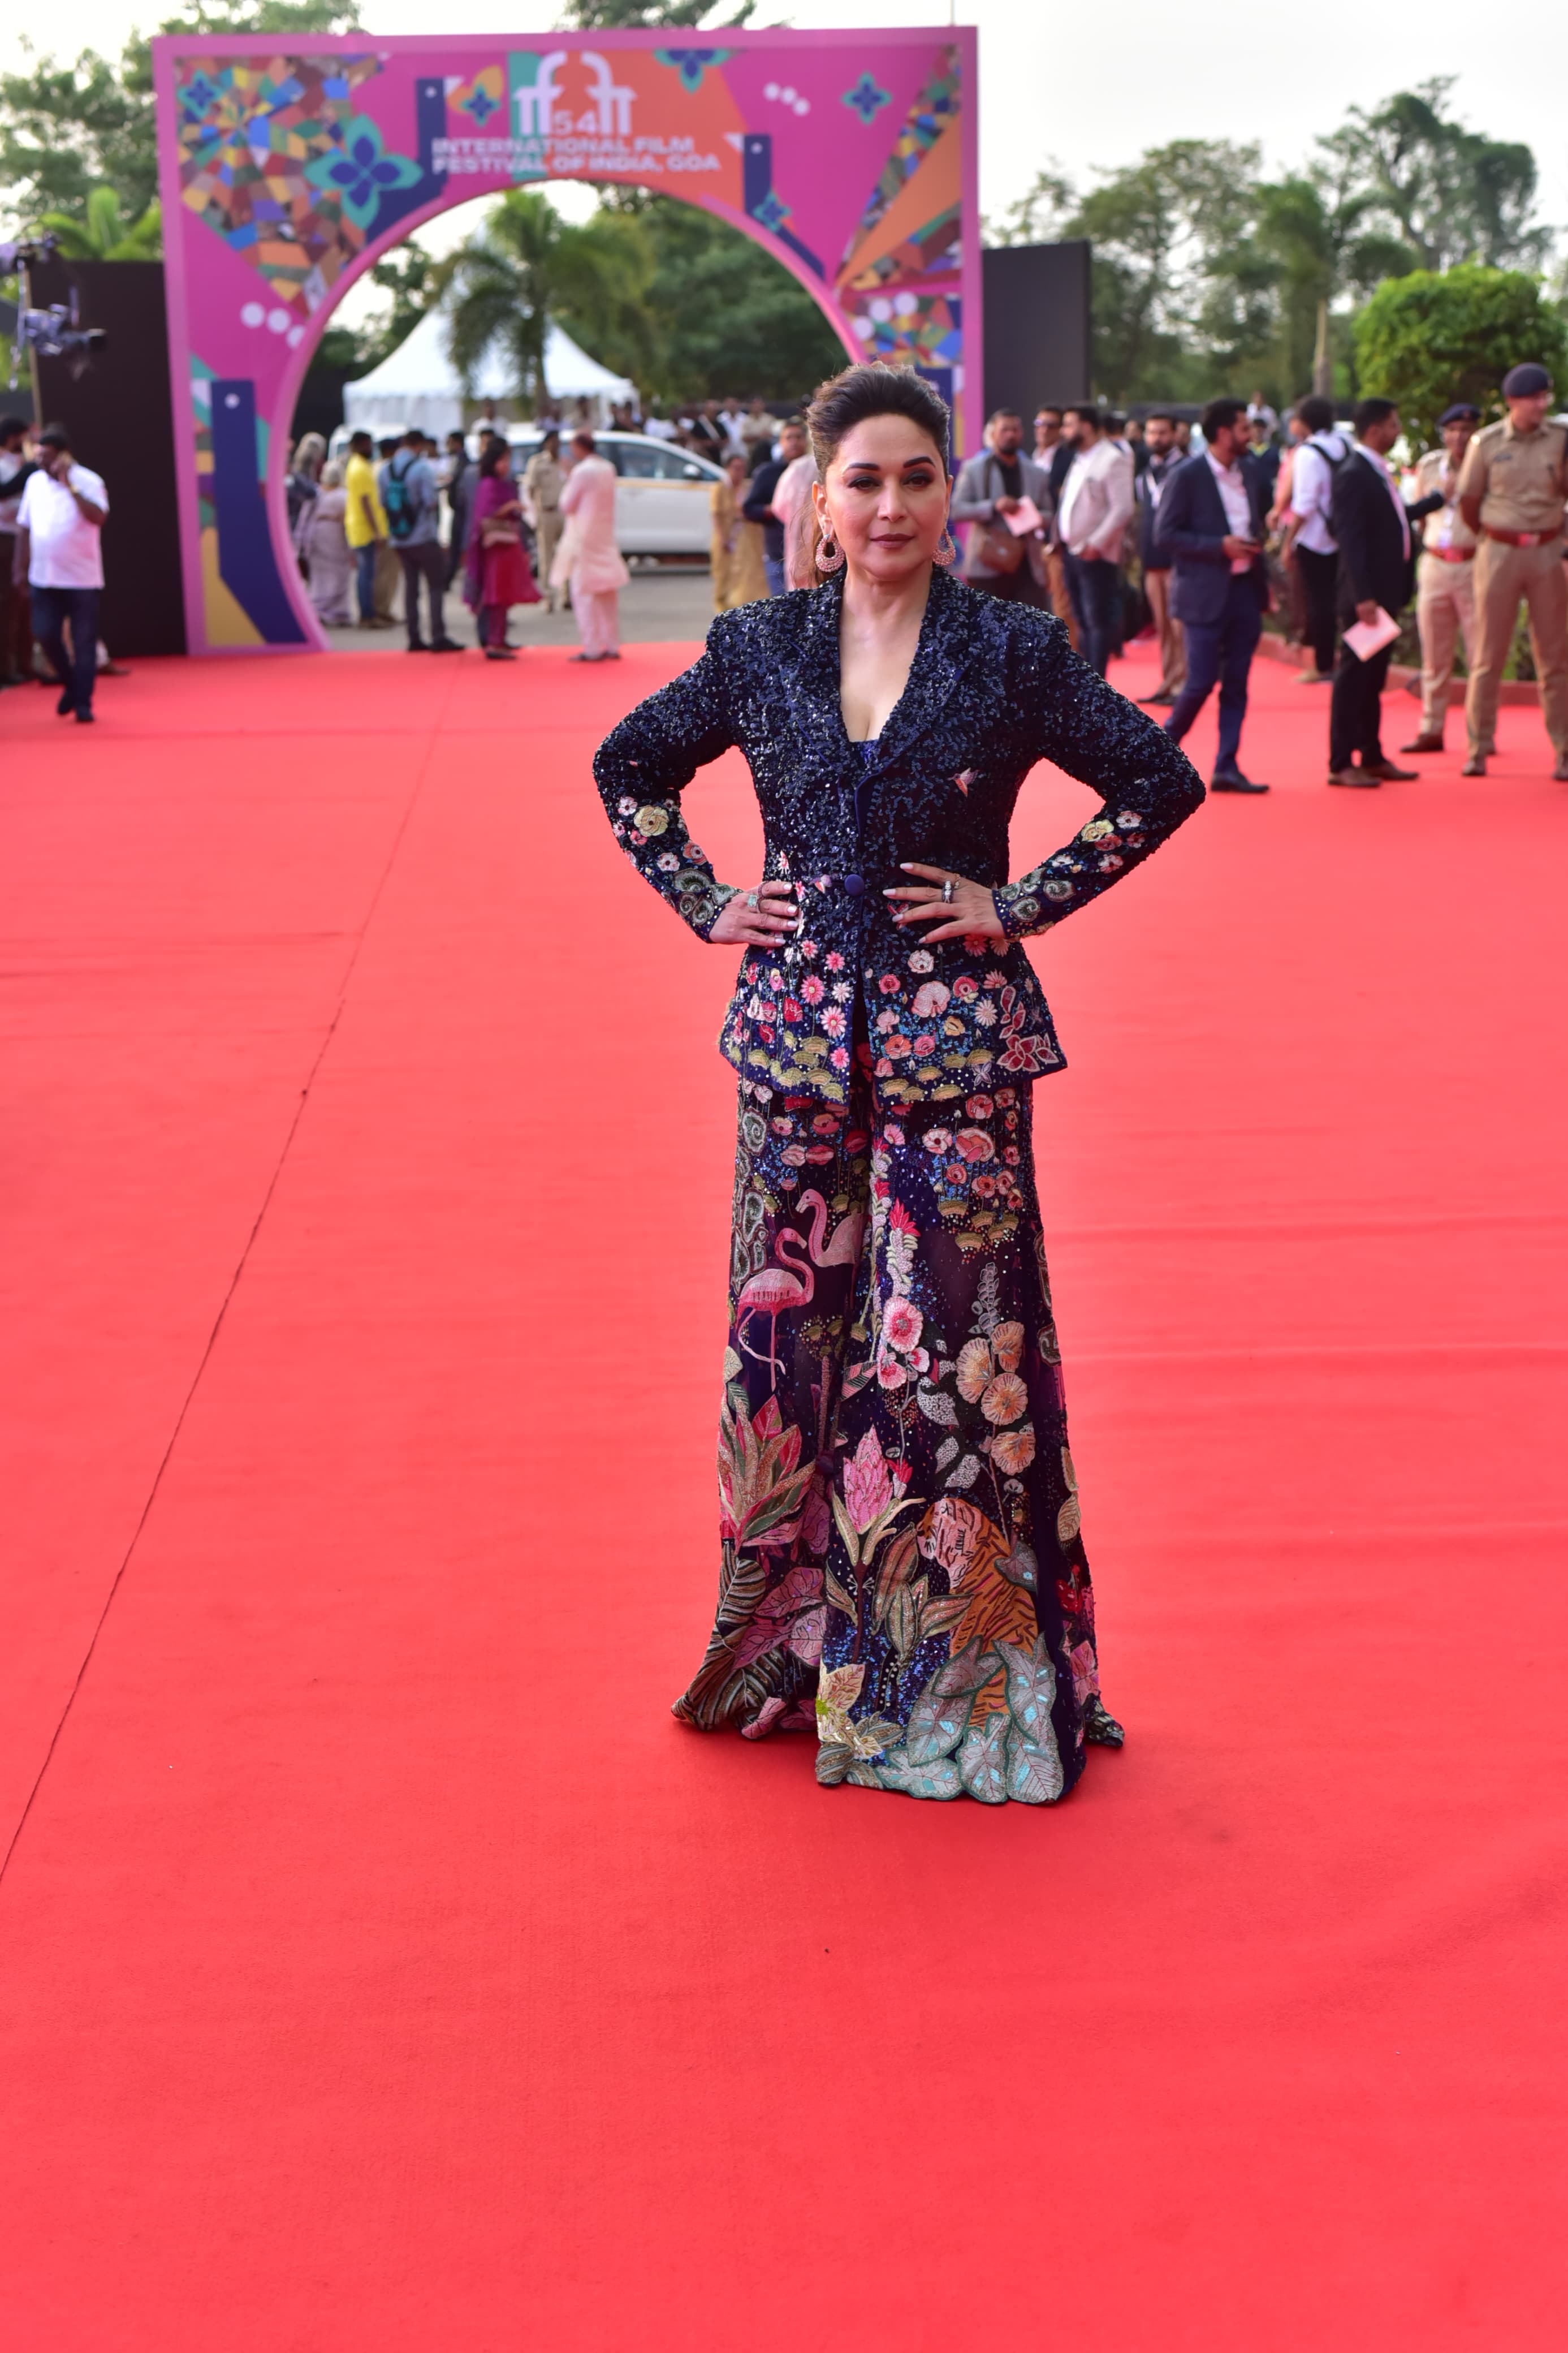 Before being feted, Madhuri Dixit strutted down the red carpet looking like a dream